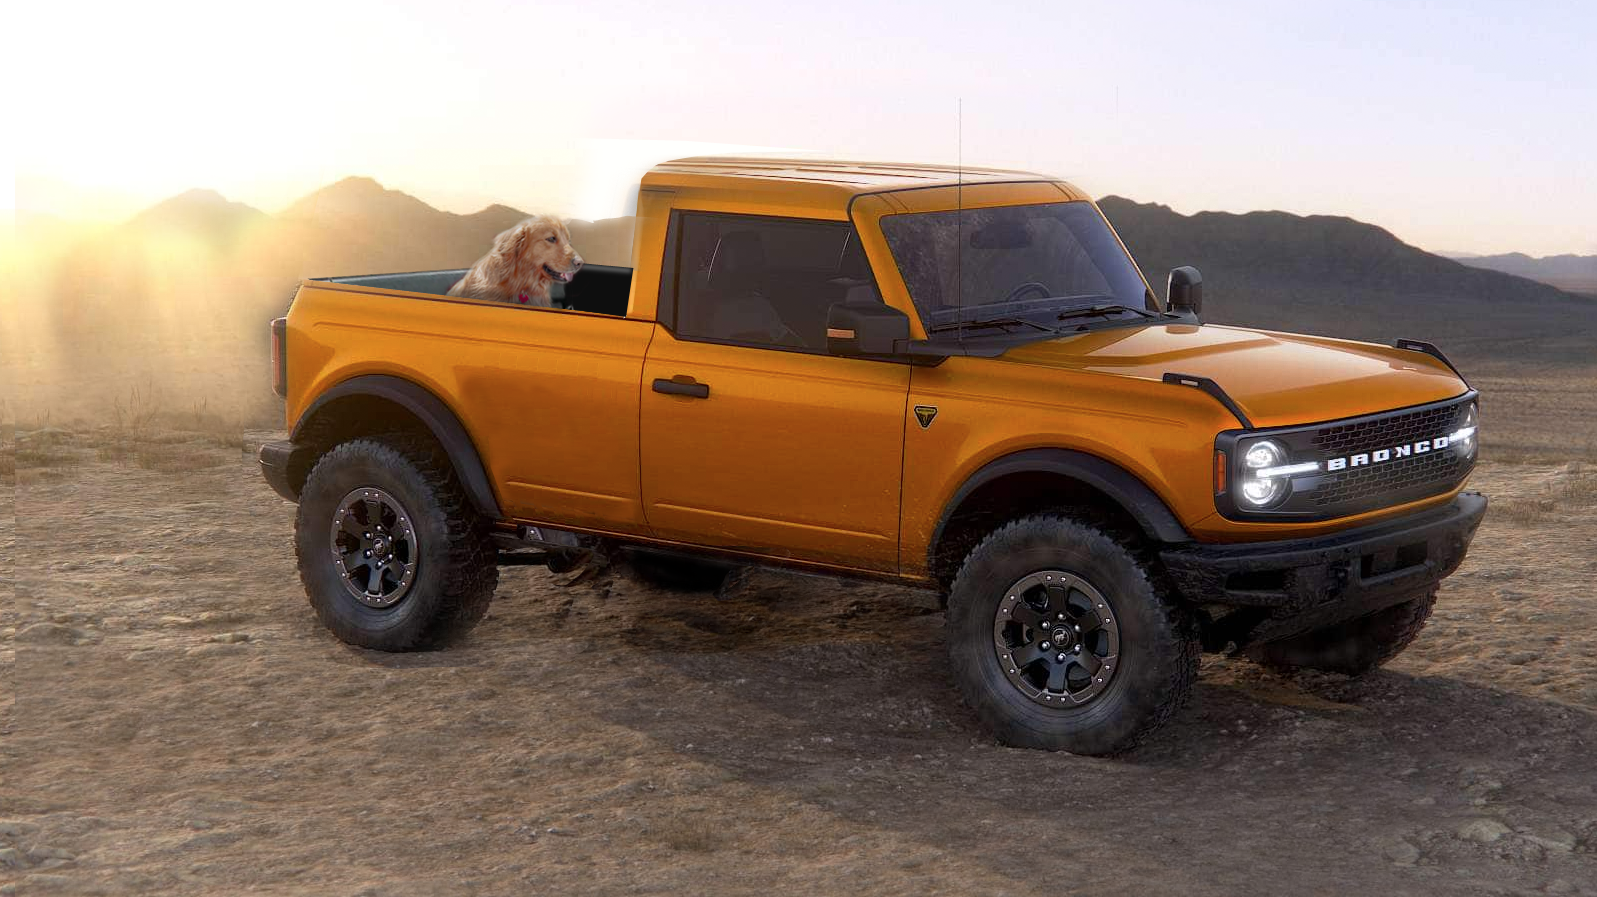 This Is What A Bronco-Based Pickup Could Look Like